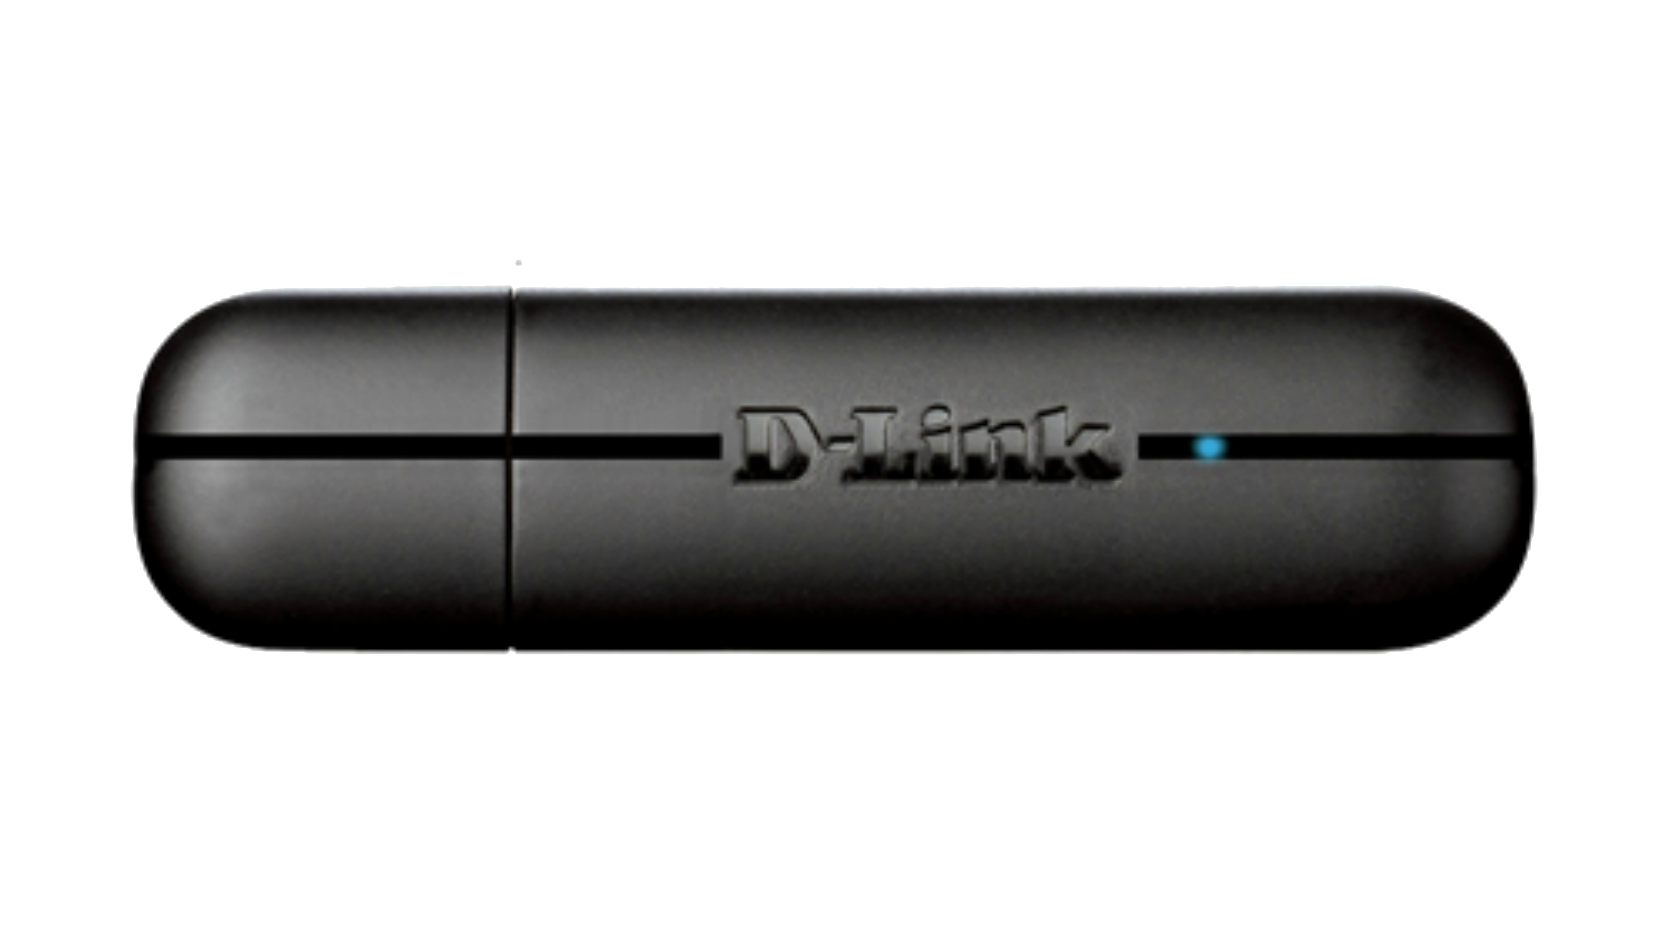 D-link Usb Wireless Adapter Dwa-123 Driver For Mac